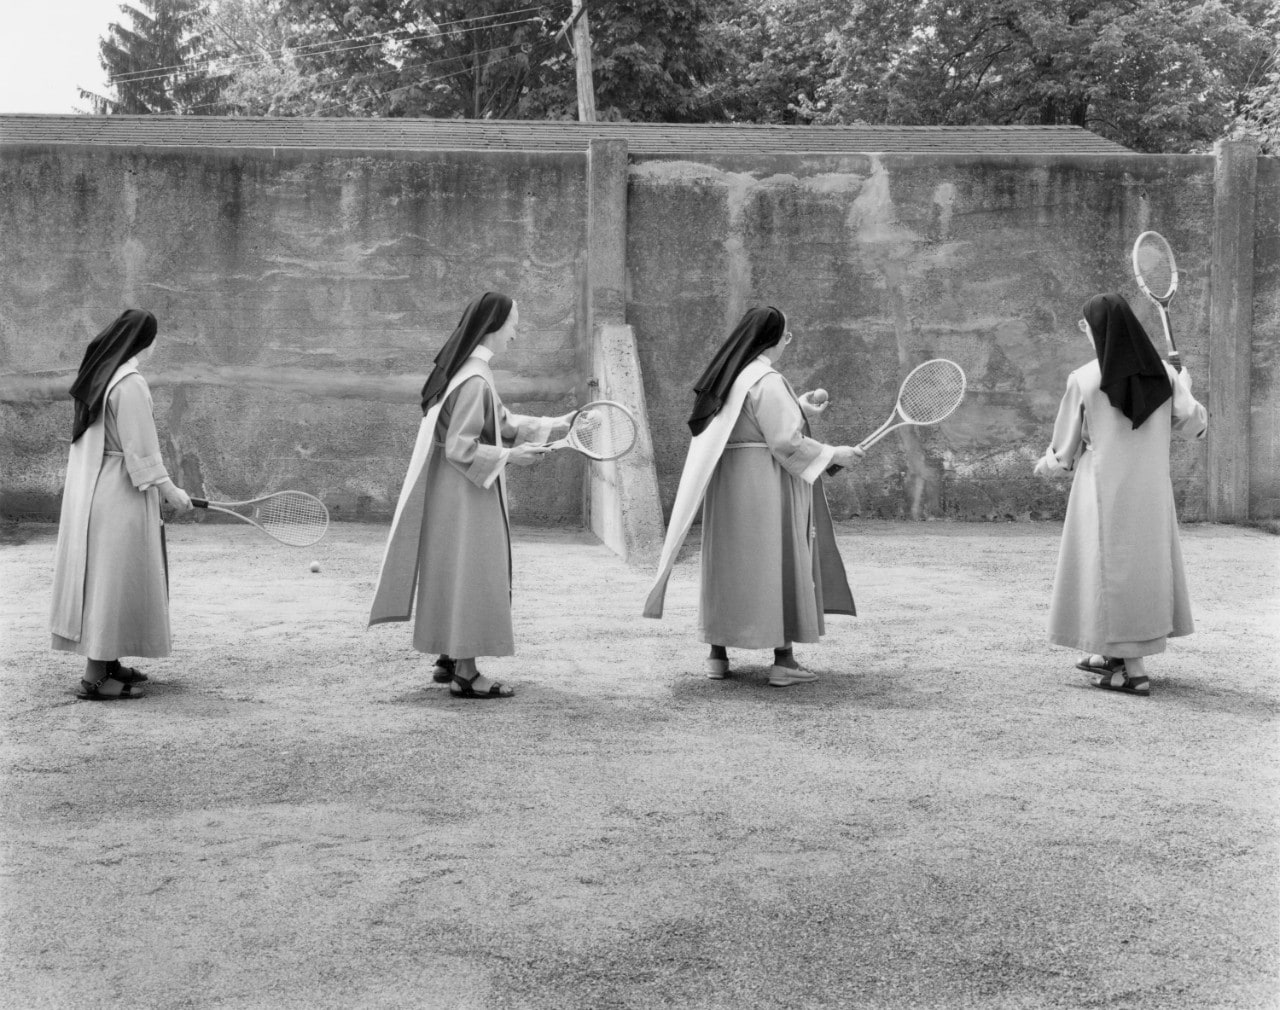 Group of nuns playing racket sport in black and white